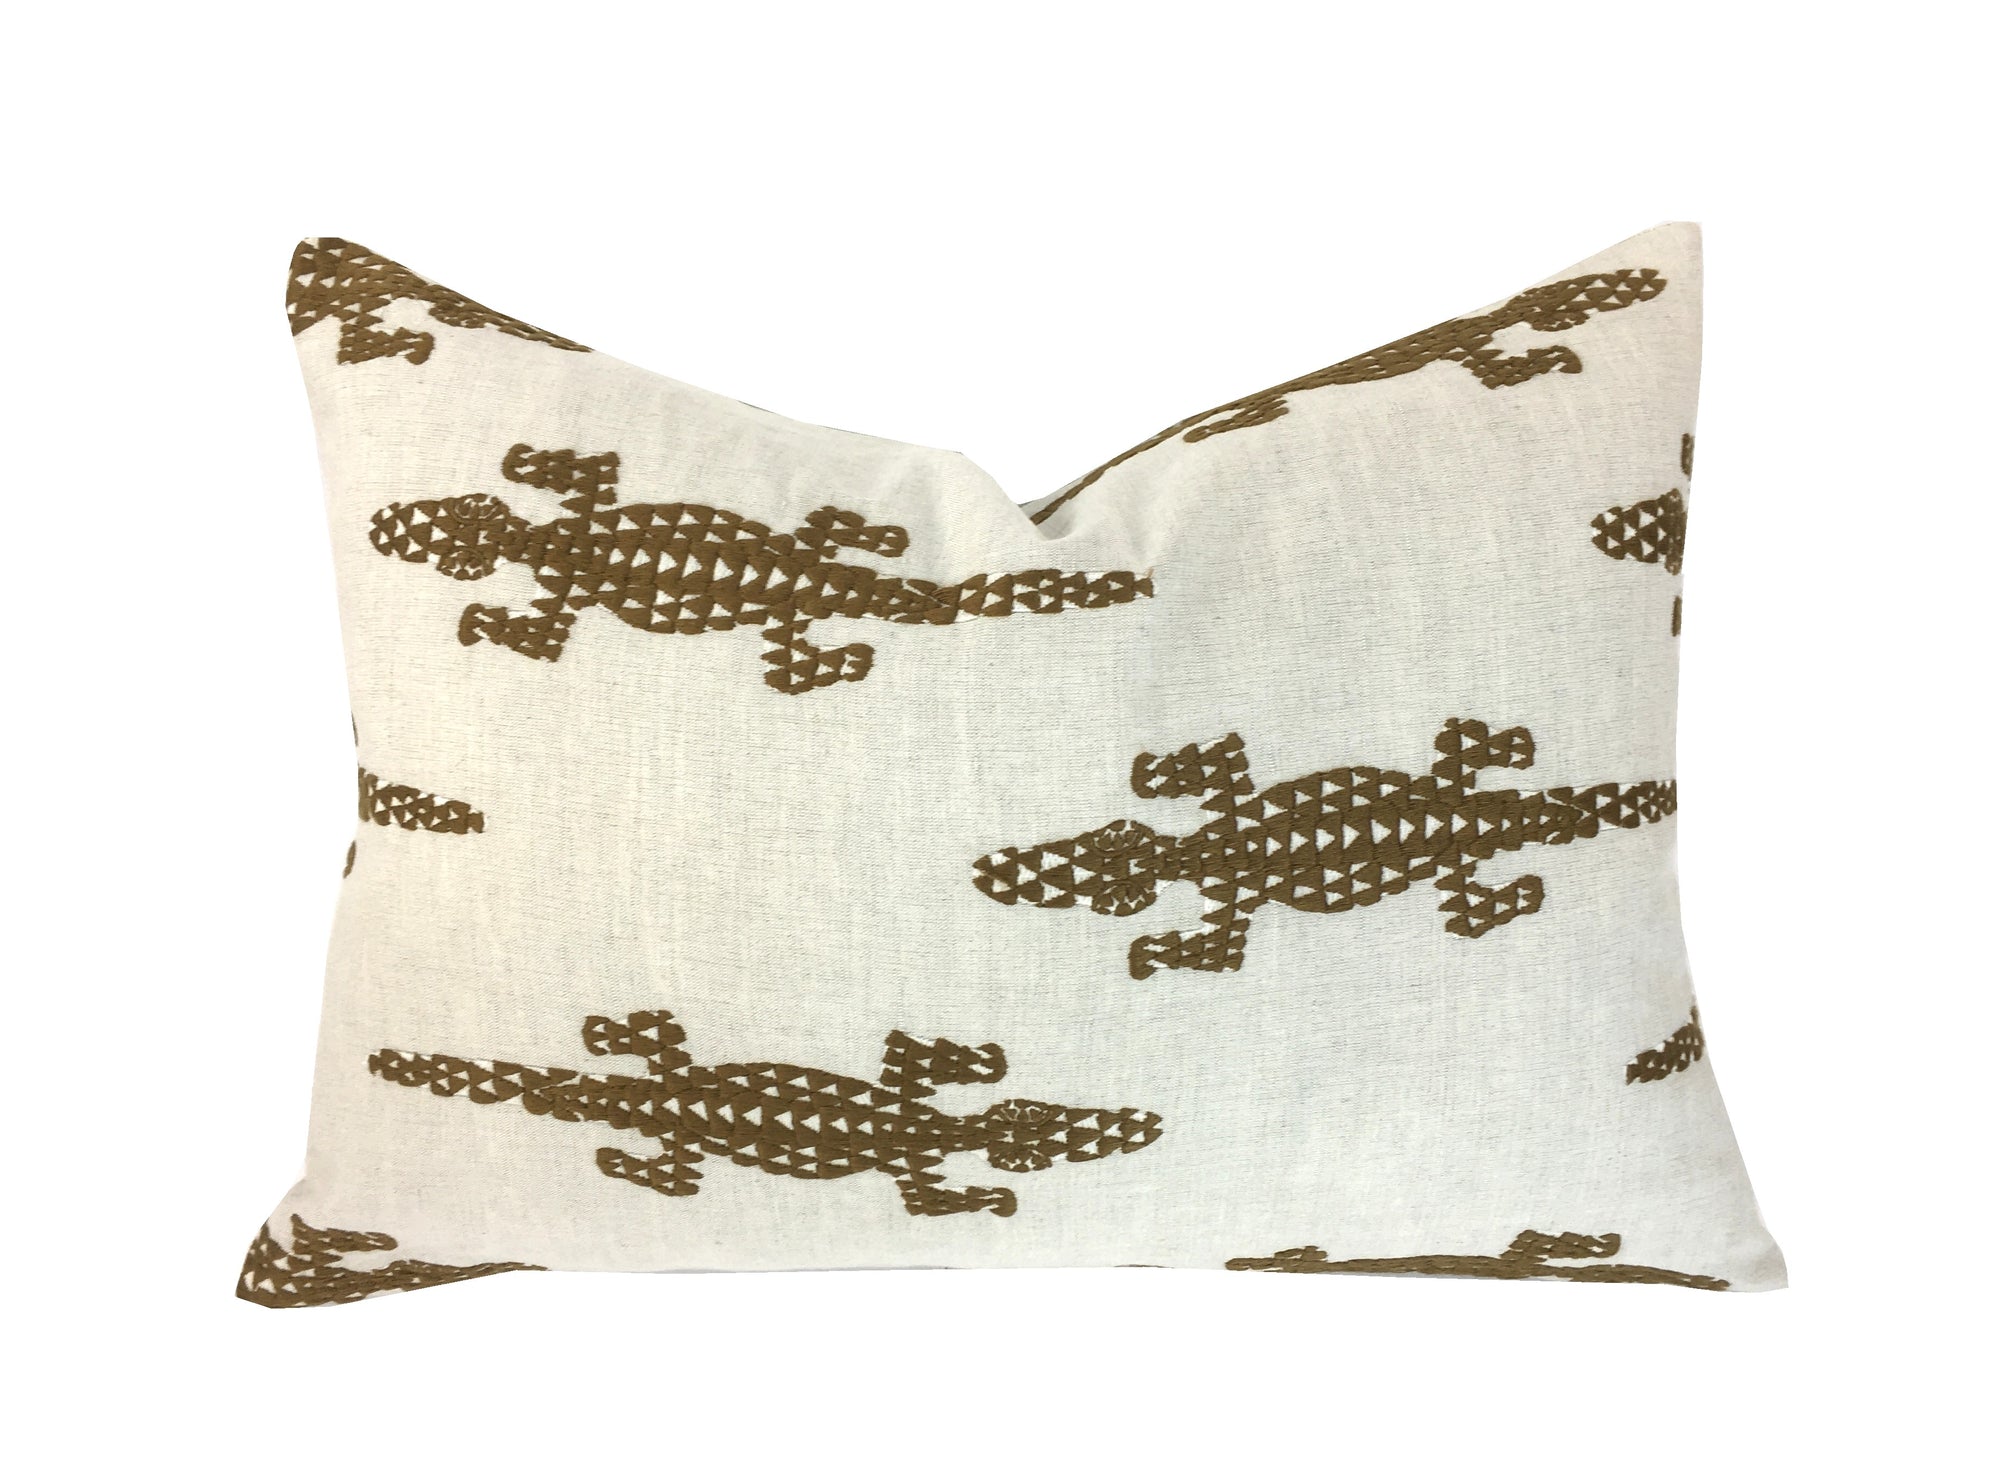 Baracoa Brown Embroidery Pillow Cover | Lumbar Sizes